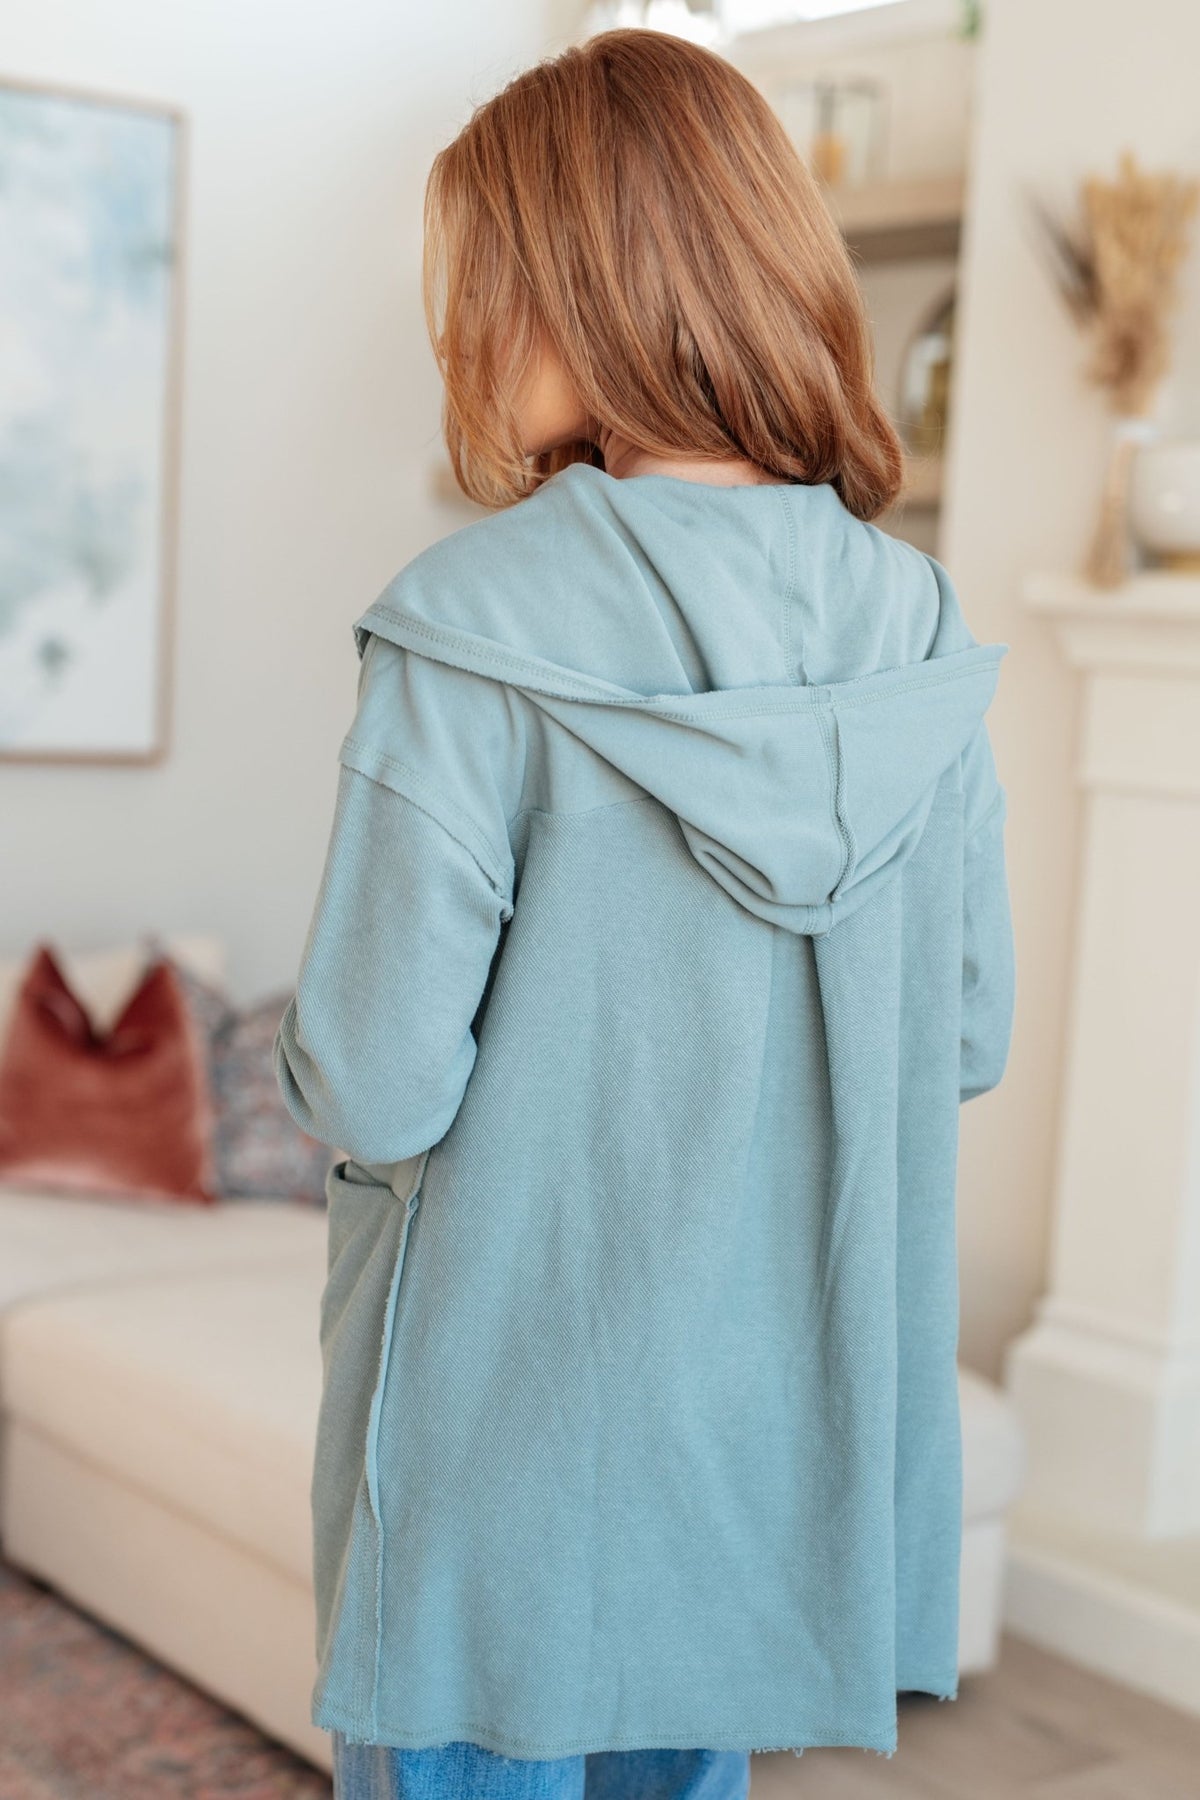 Please Proceed Hooded Cardigan - Happily Ever Atchison Shop Co.